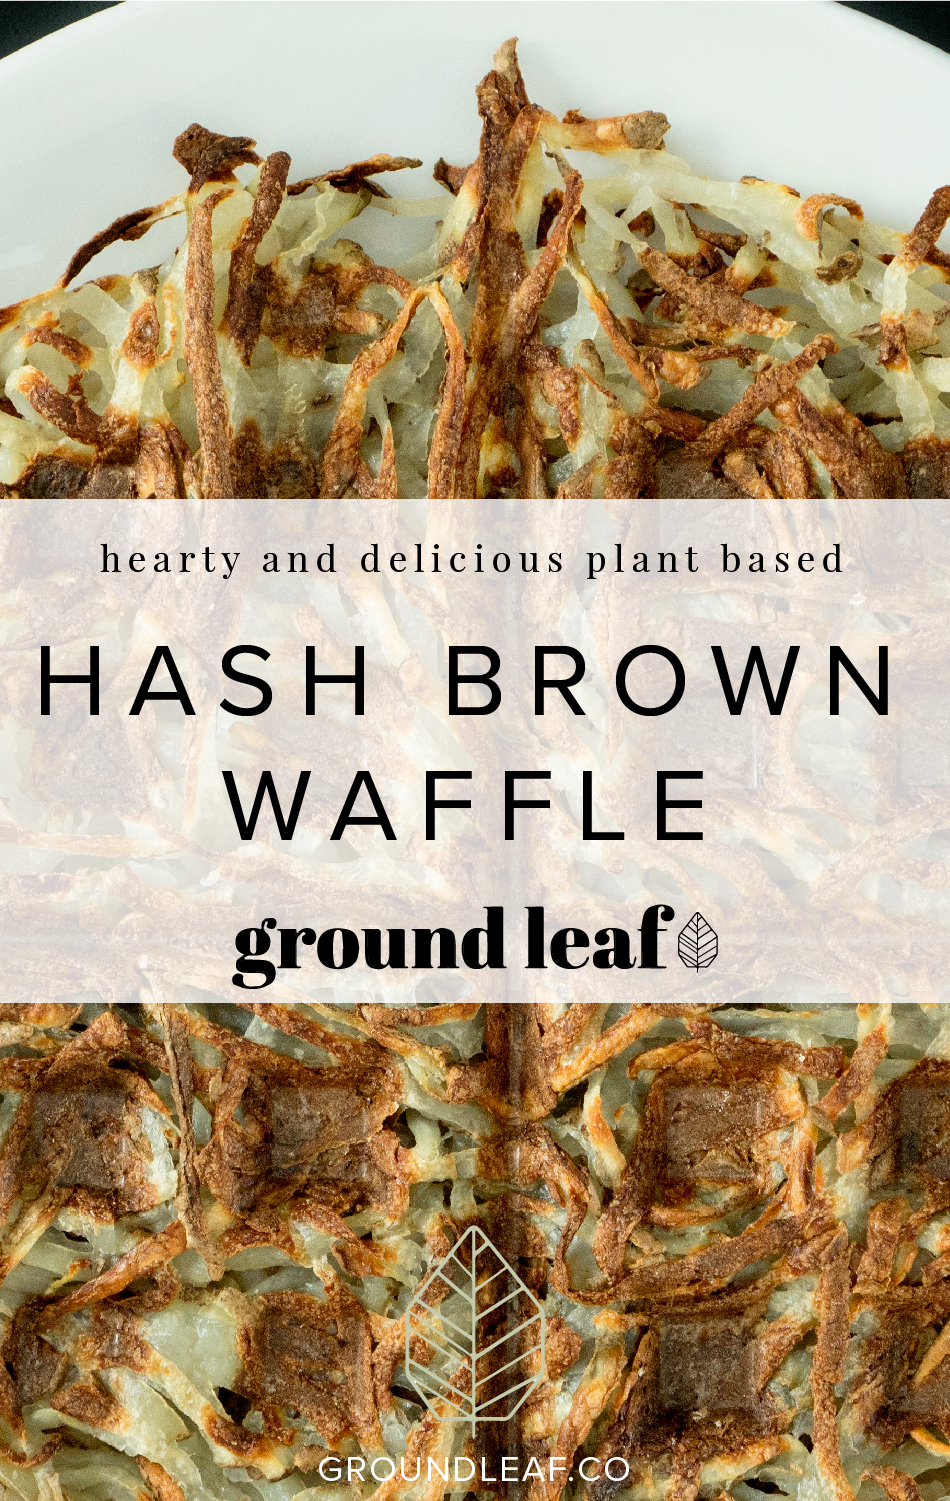 The best hash browns ever. Learn how to make it in a waffle iron!